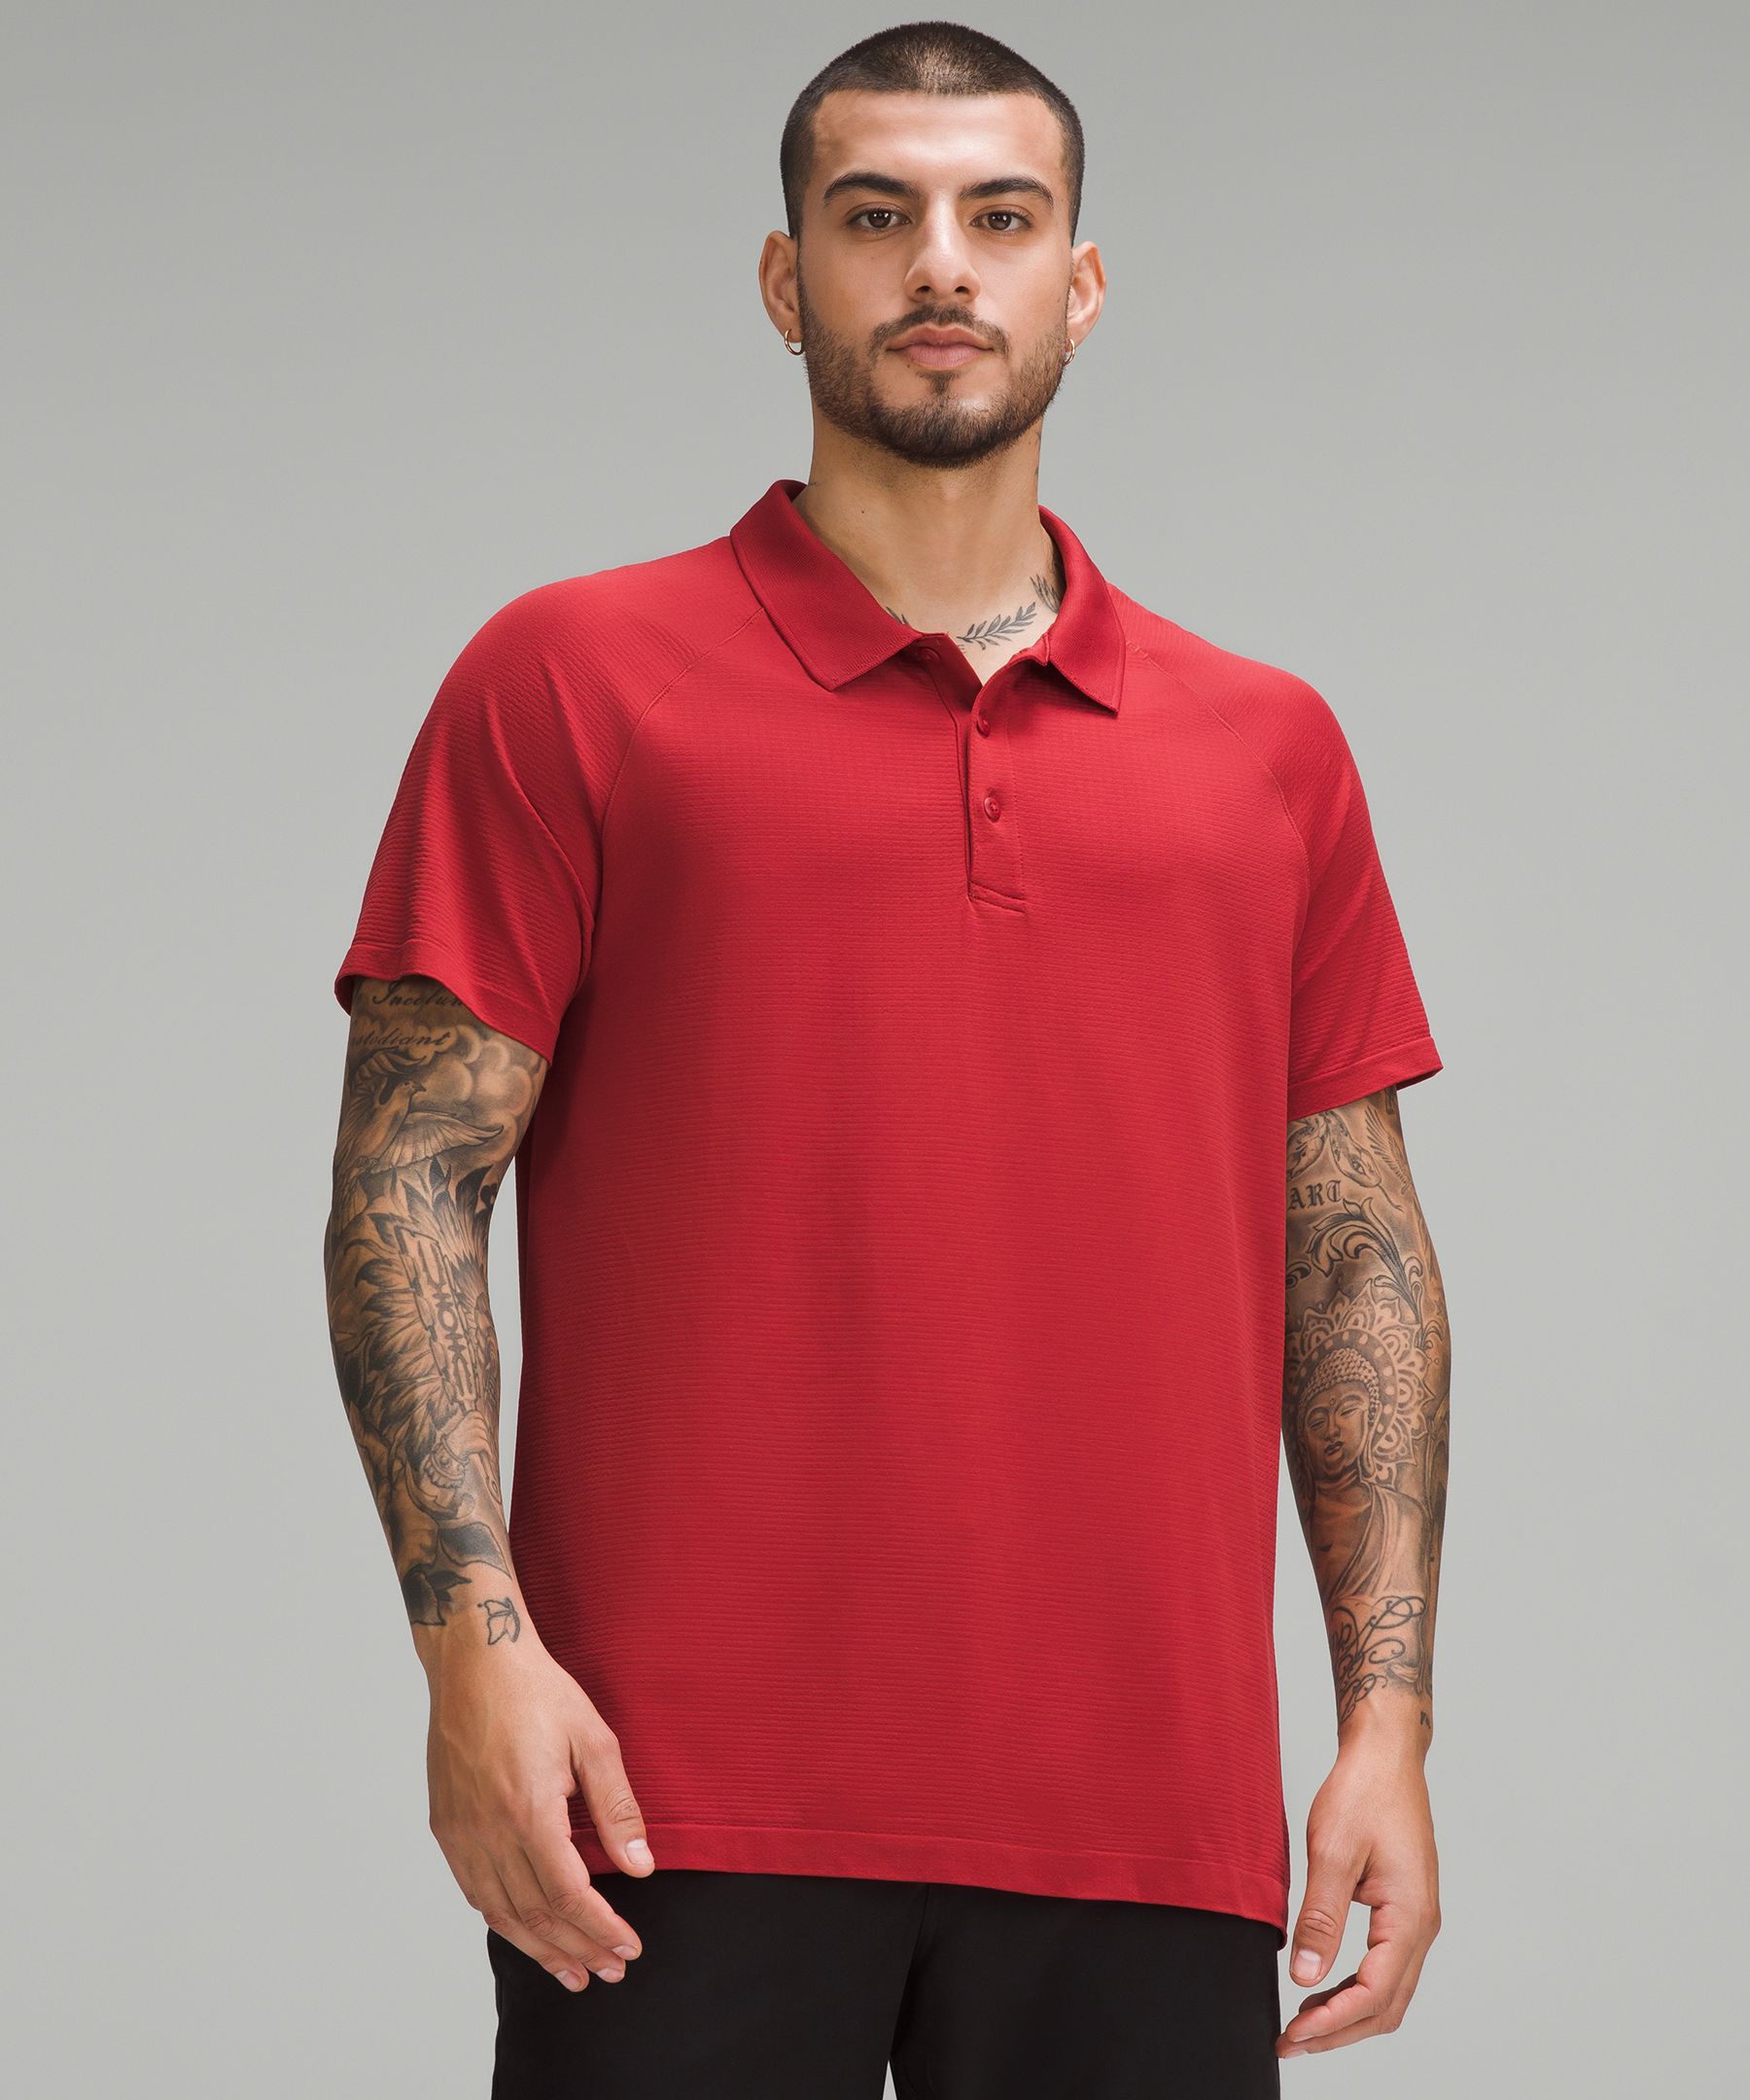 Lululemon Metal Vent Tech Polo Shirt In Red